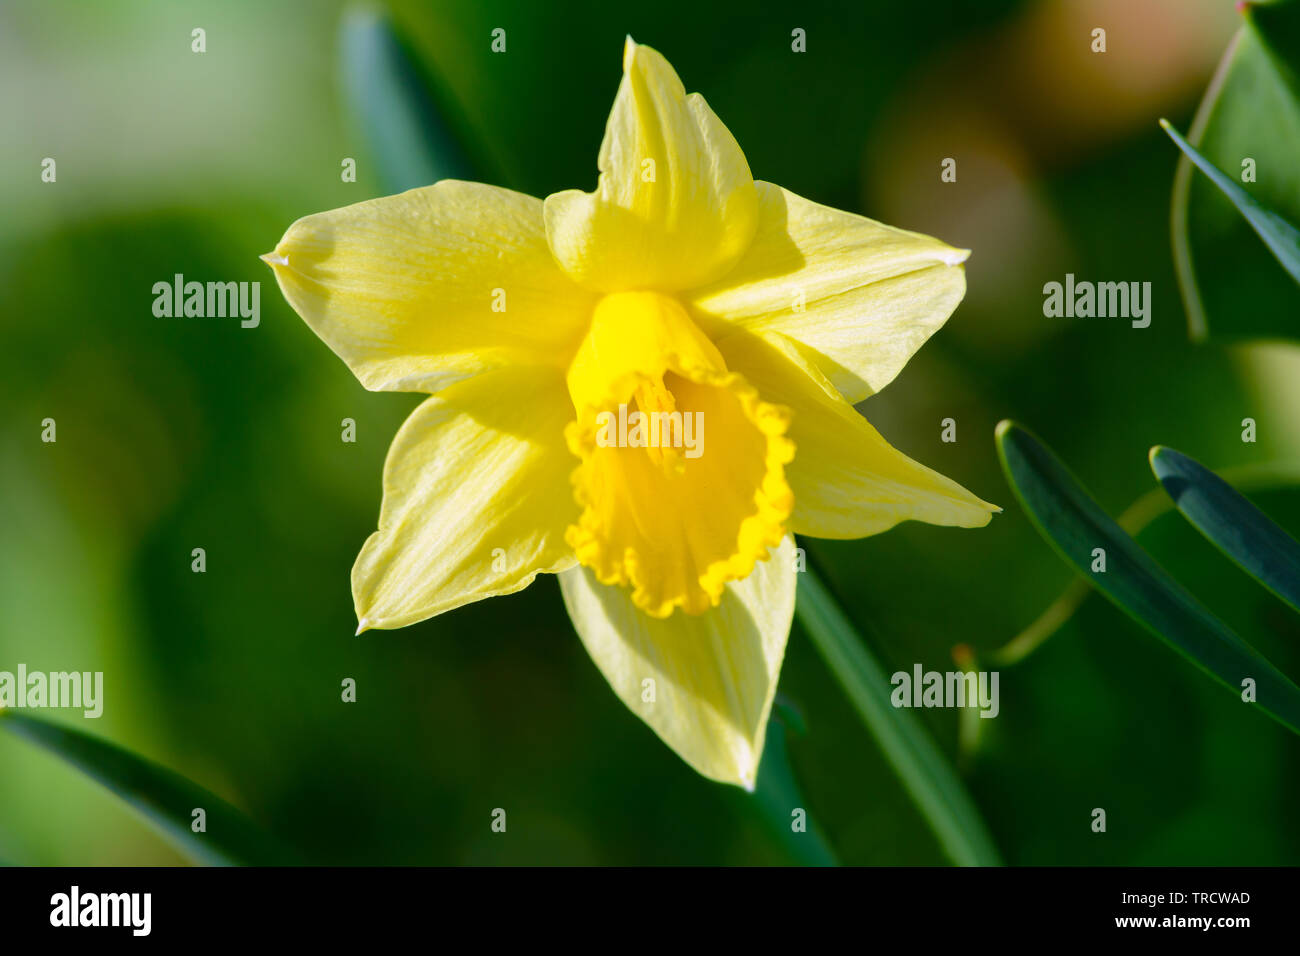 Head of a yellow daffodil flower blooming in the spring garden in close-up. Stock Photo